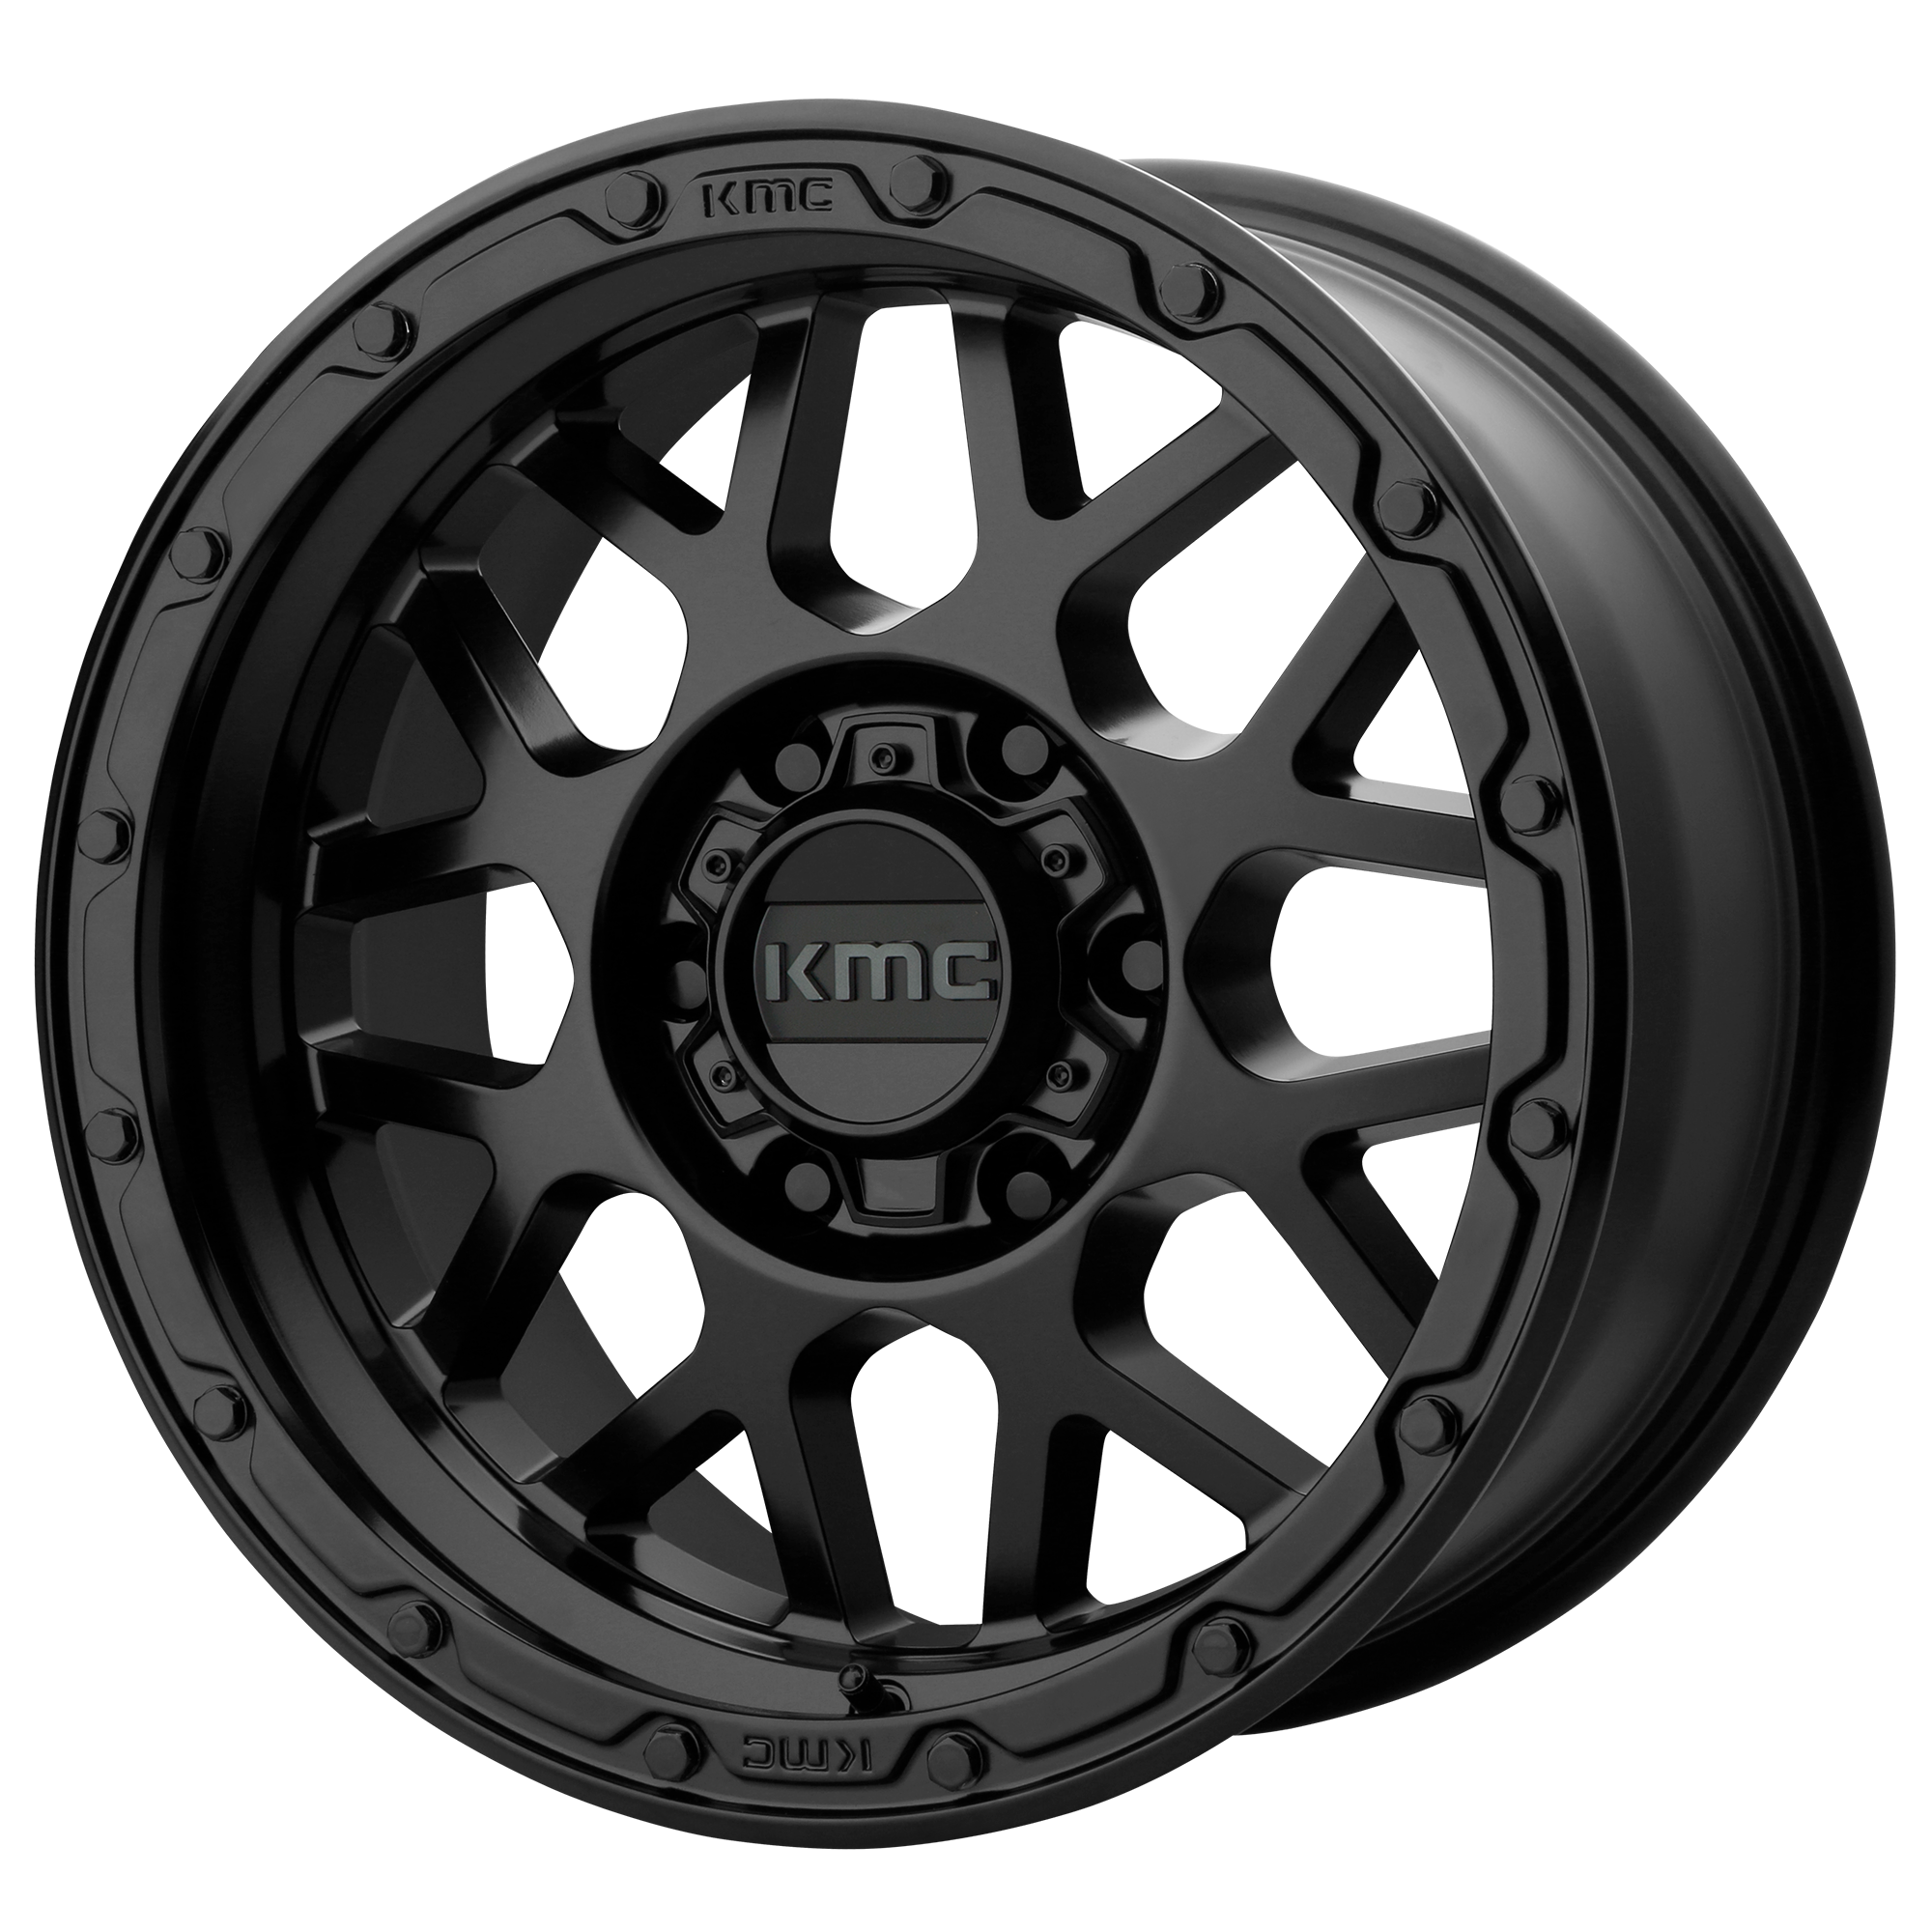 GRENADE OFF-ROAD 17x8.5 6x139.70 MATTE BLACK (0 mm) - Tires and Engine Performance